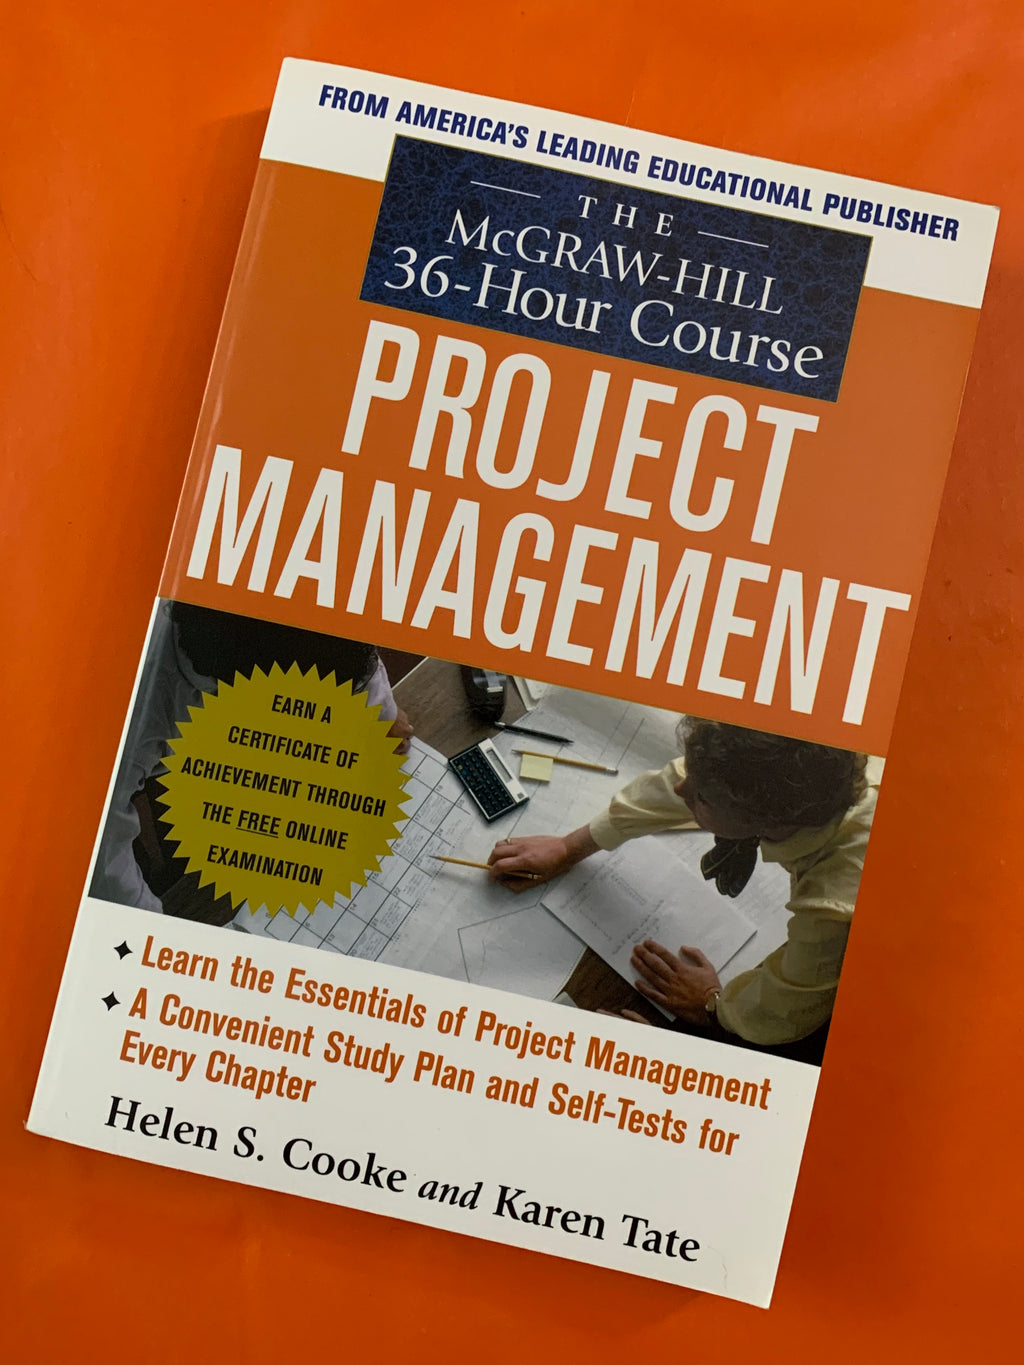 The McGraw-Hill 36-Hour Course: Project Management- By Helen S. Cooke and Karen Tate